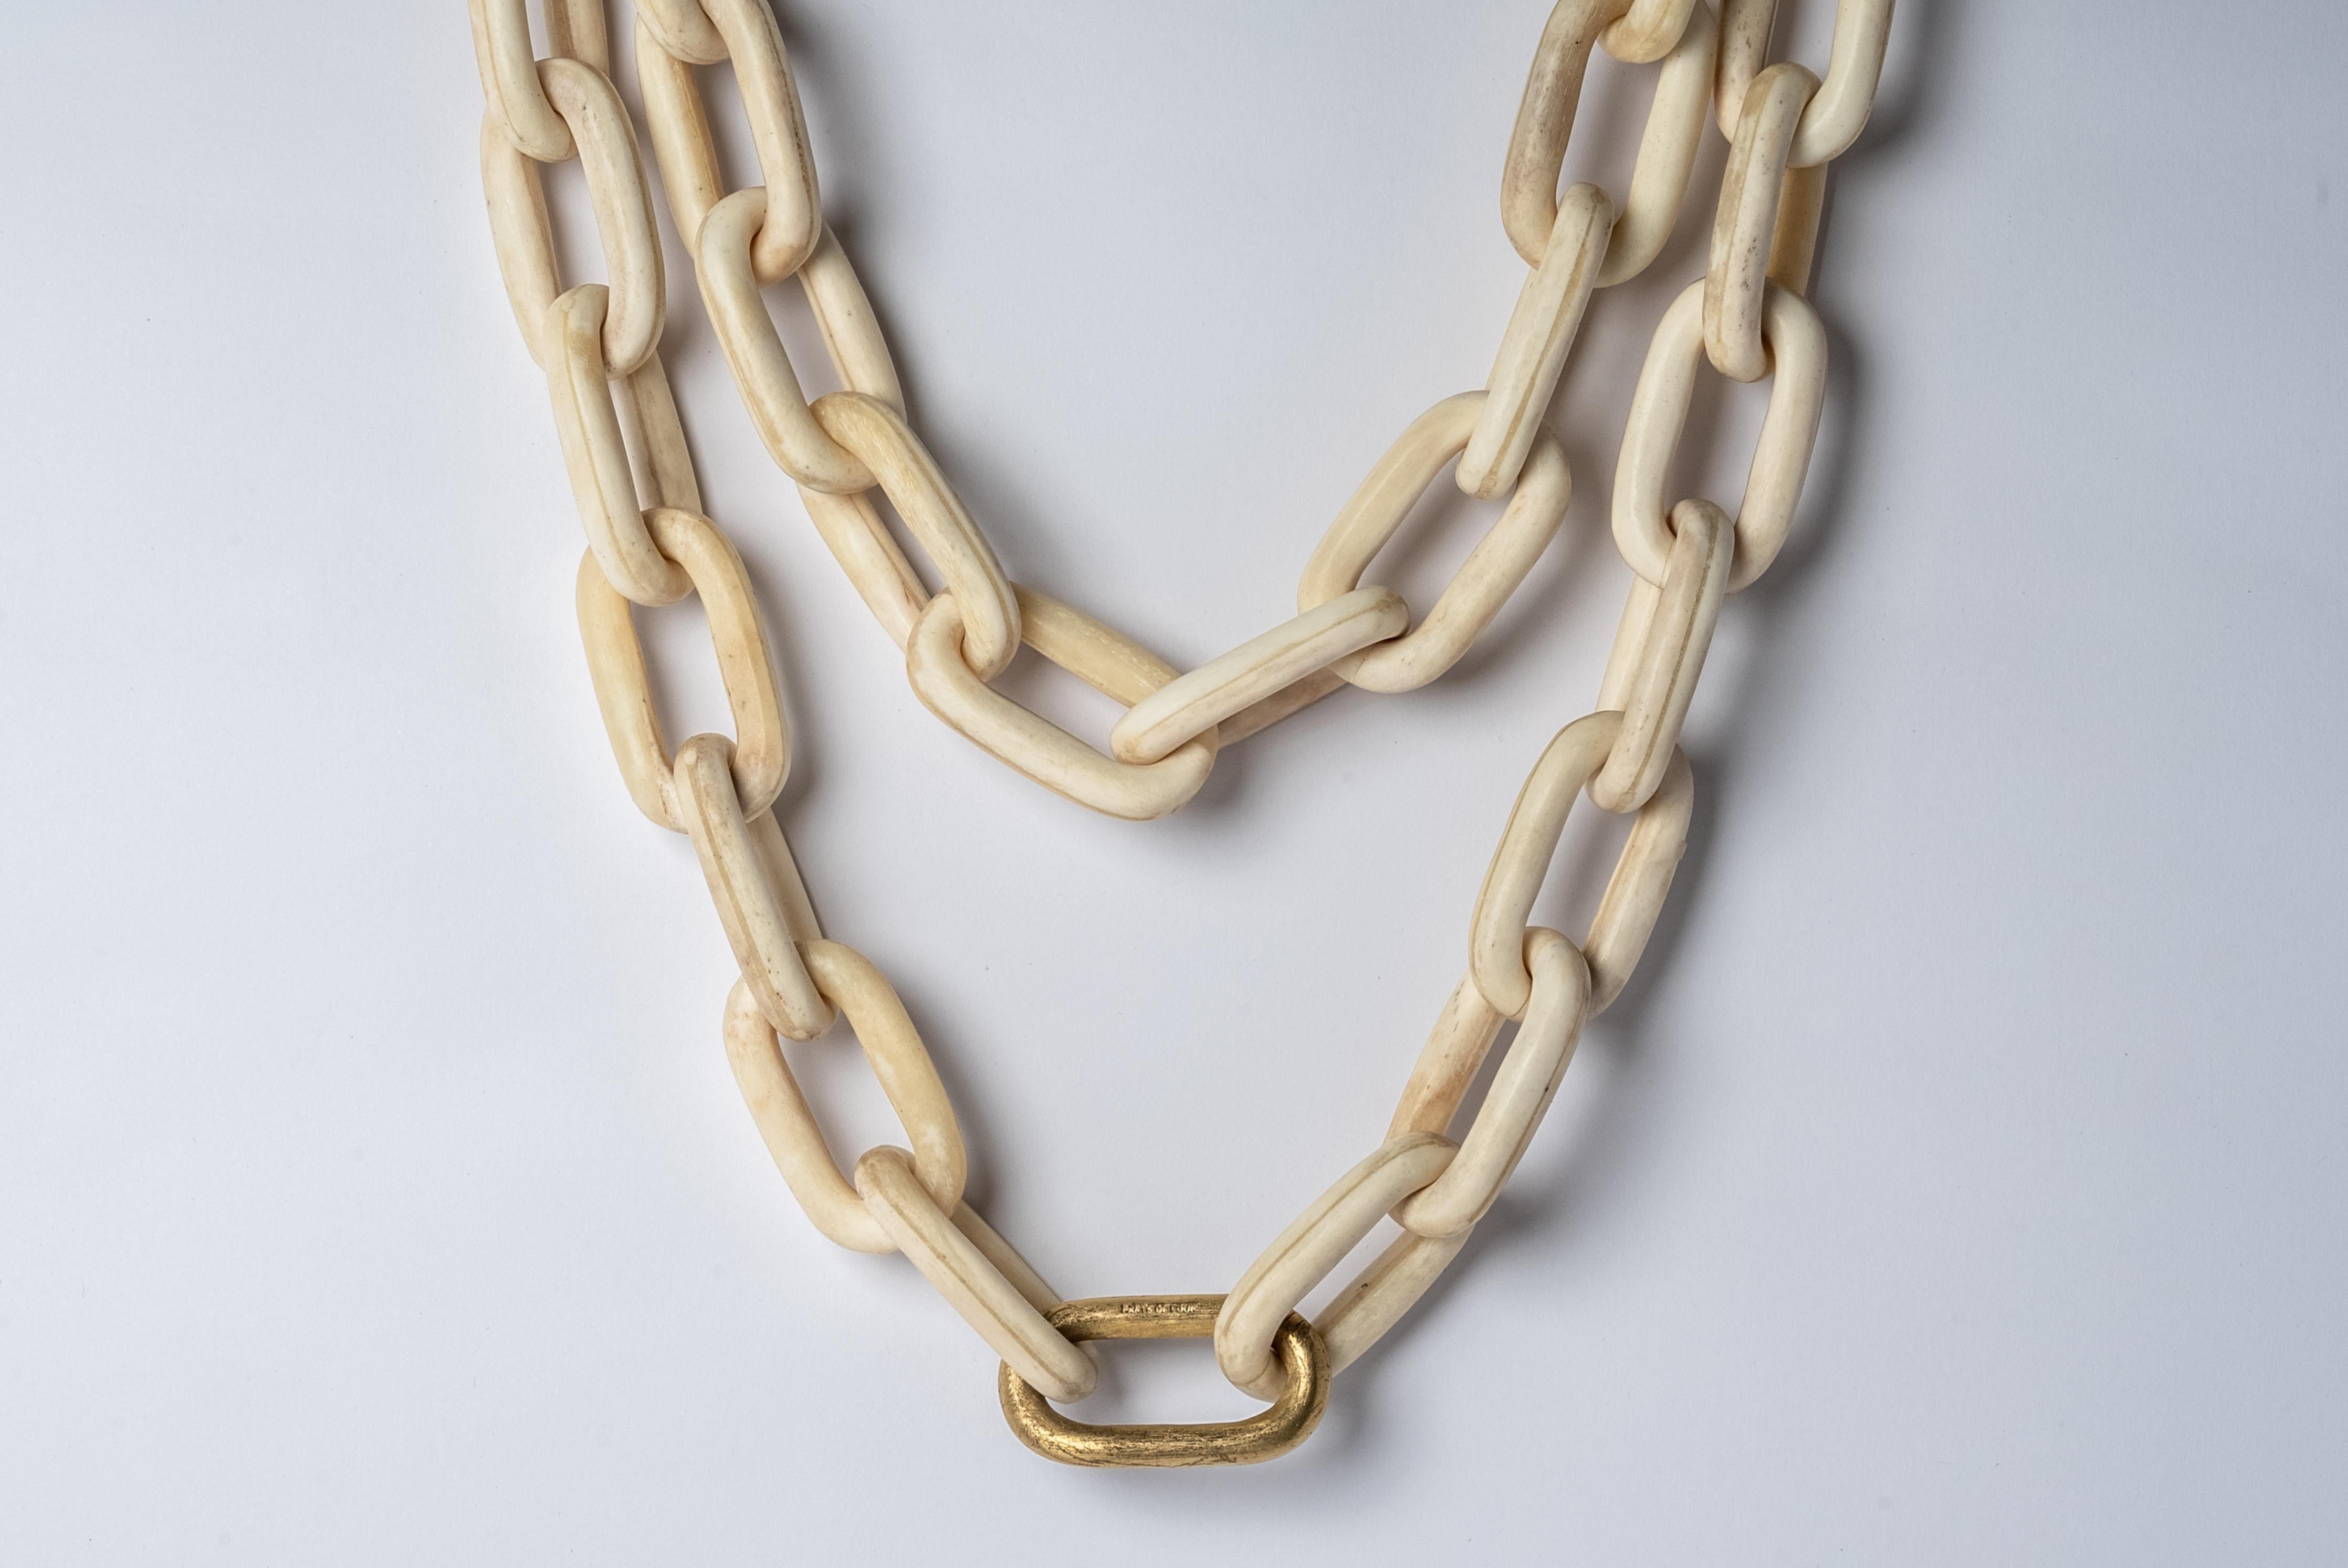 Organic Chain (Medium Links, 113cm, B+AG) In New Condition For Sale In Hong Kong, Hong Kong Island